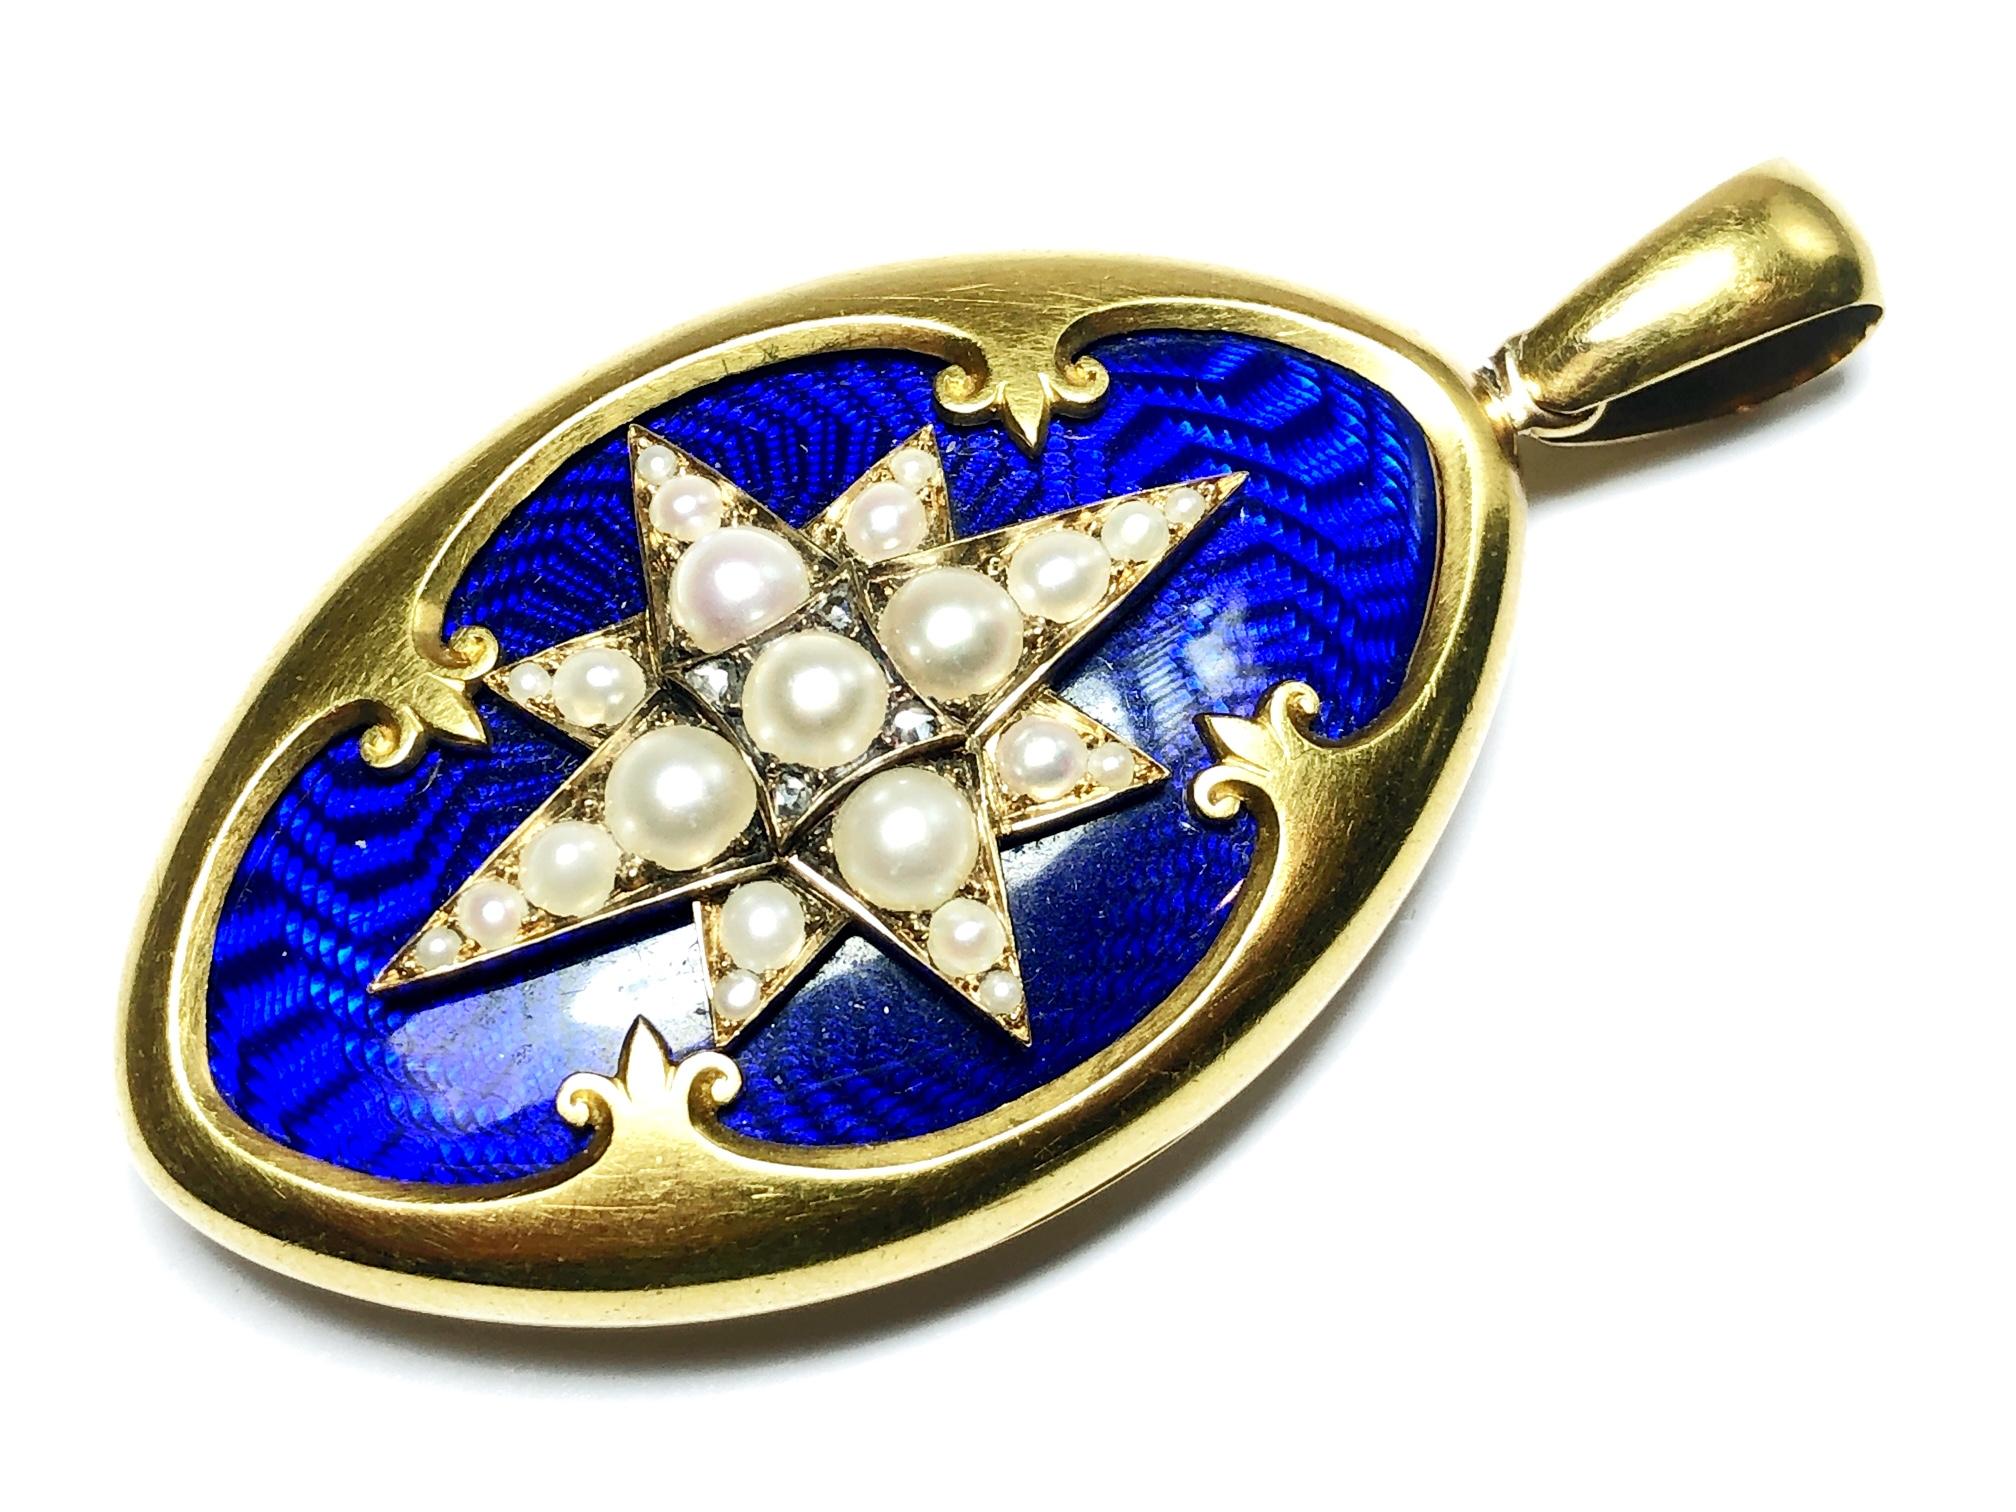 A Victorian blue enamel, seed pearl and gold locket, with a natural half pearl set star, with rose-cut diamonds, on blue guilloche enamel, mounted in gold. There is a small piece of paper, used as a backing, within the locket, from a book, dated